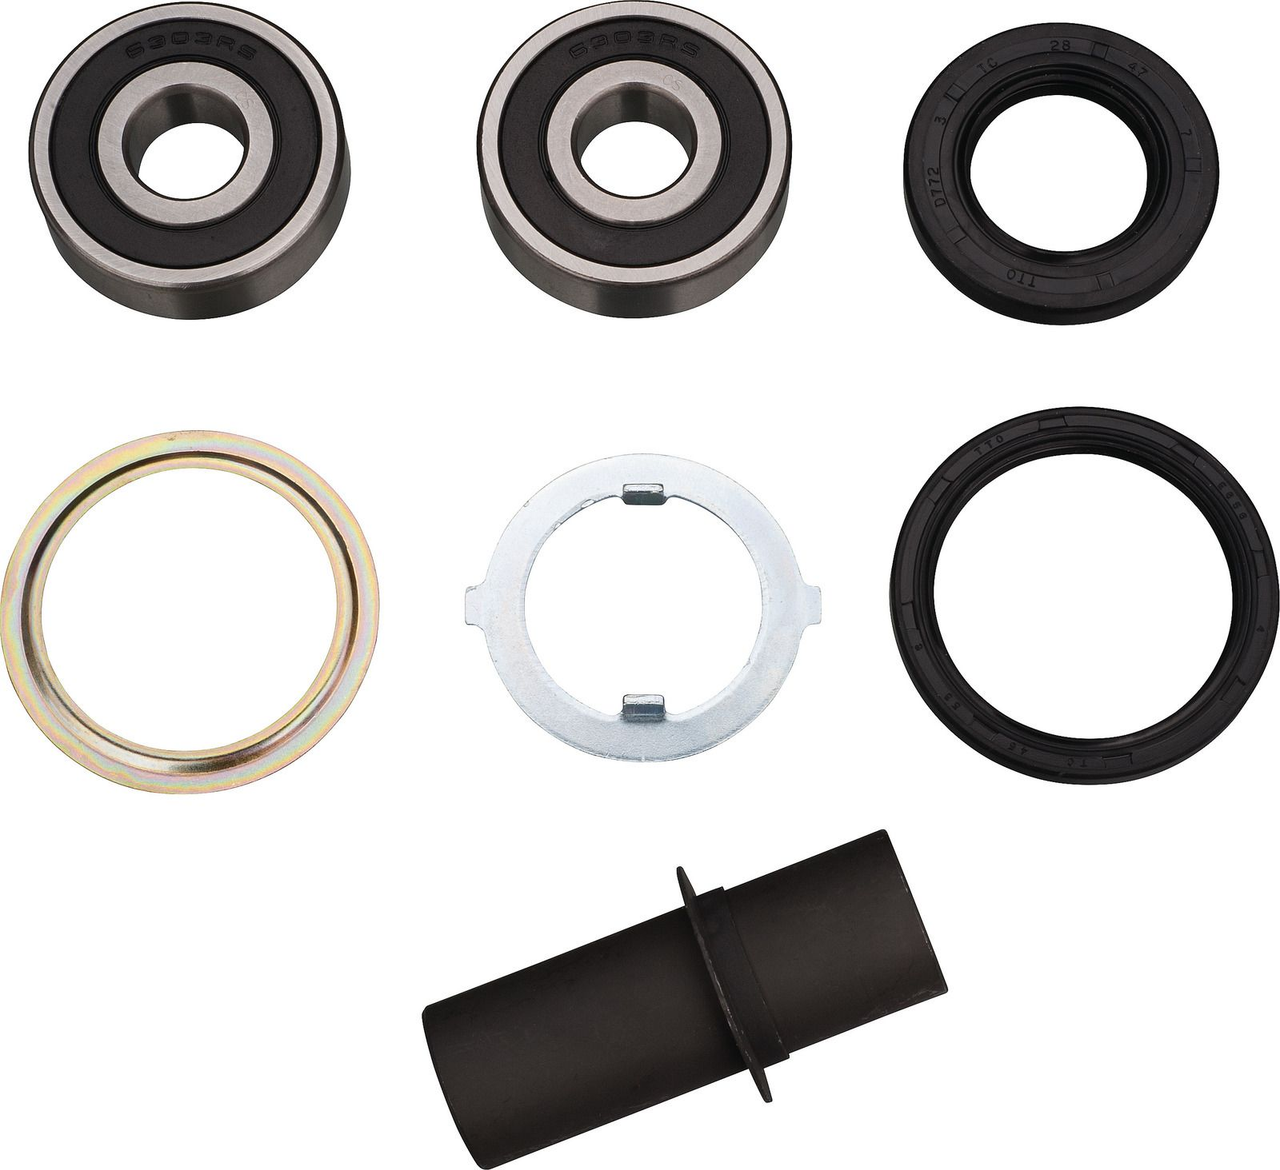 Small Parts Kit for Front Hub (Disc Brake), as addition for item 28848RP, incl. bearings-SR500